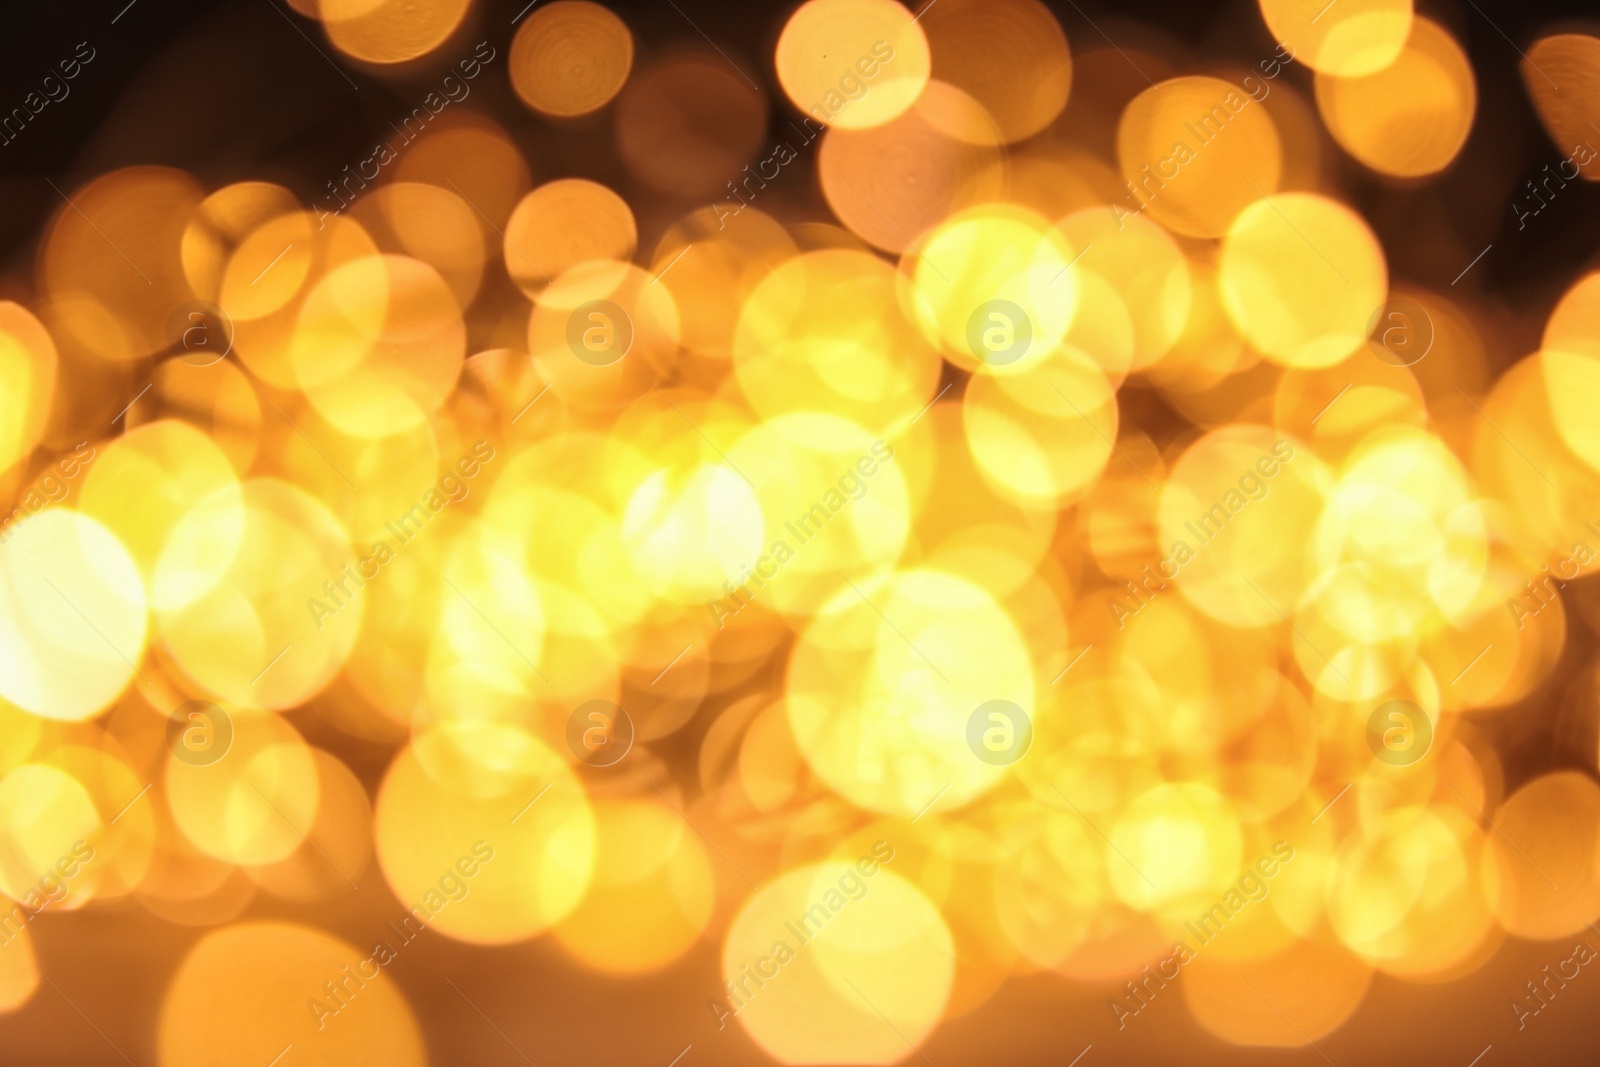 Photo of Gold glitter with bokeh effect on dark background